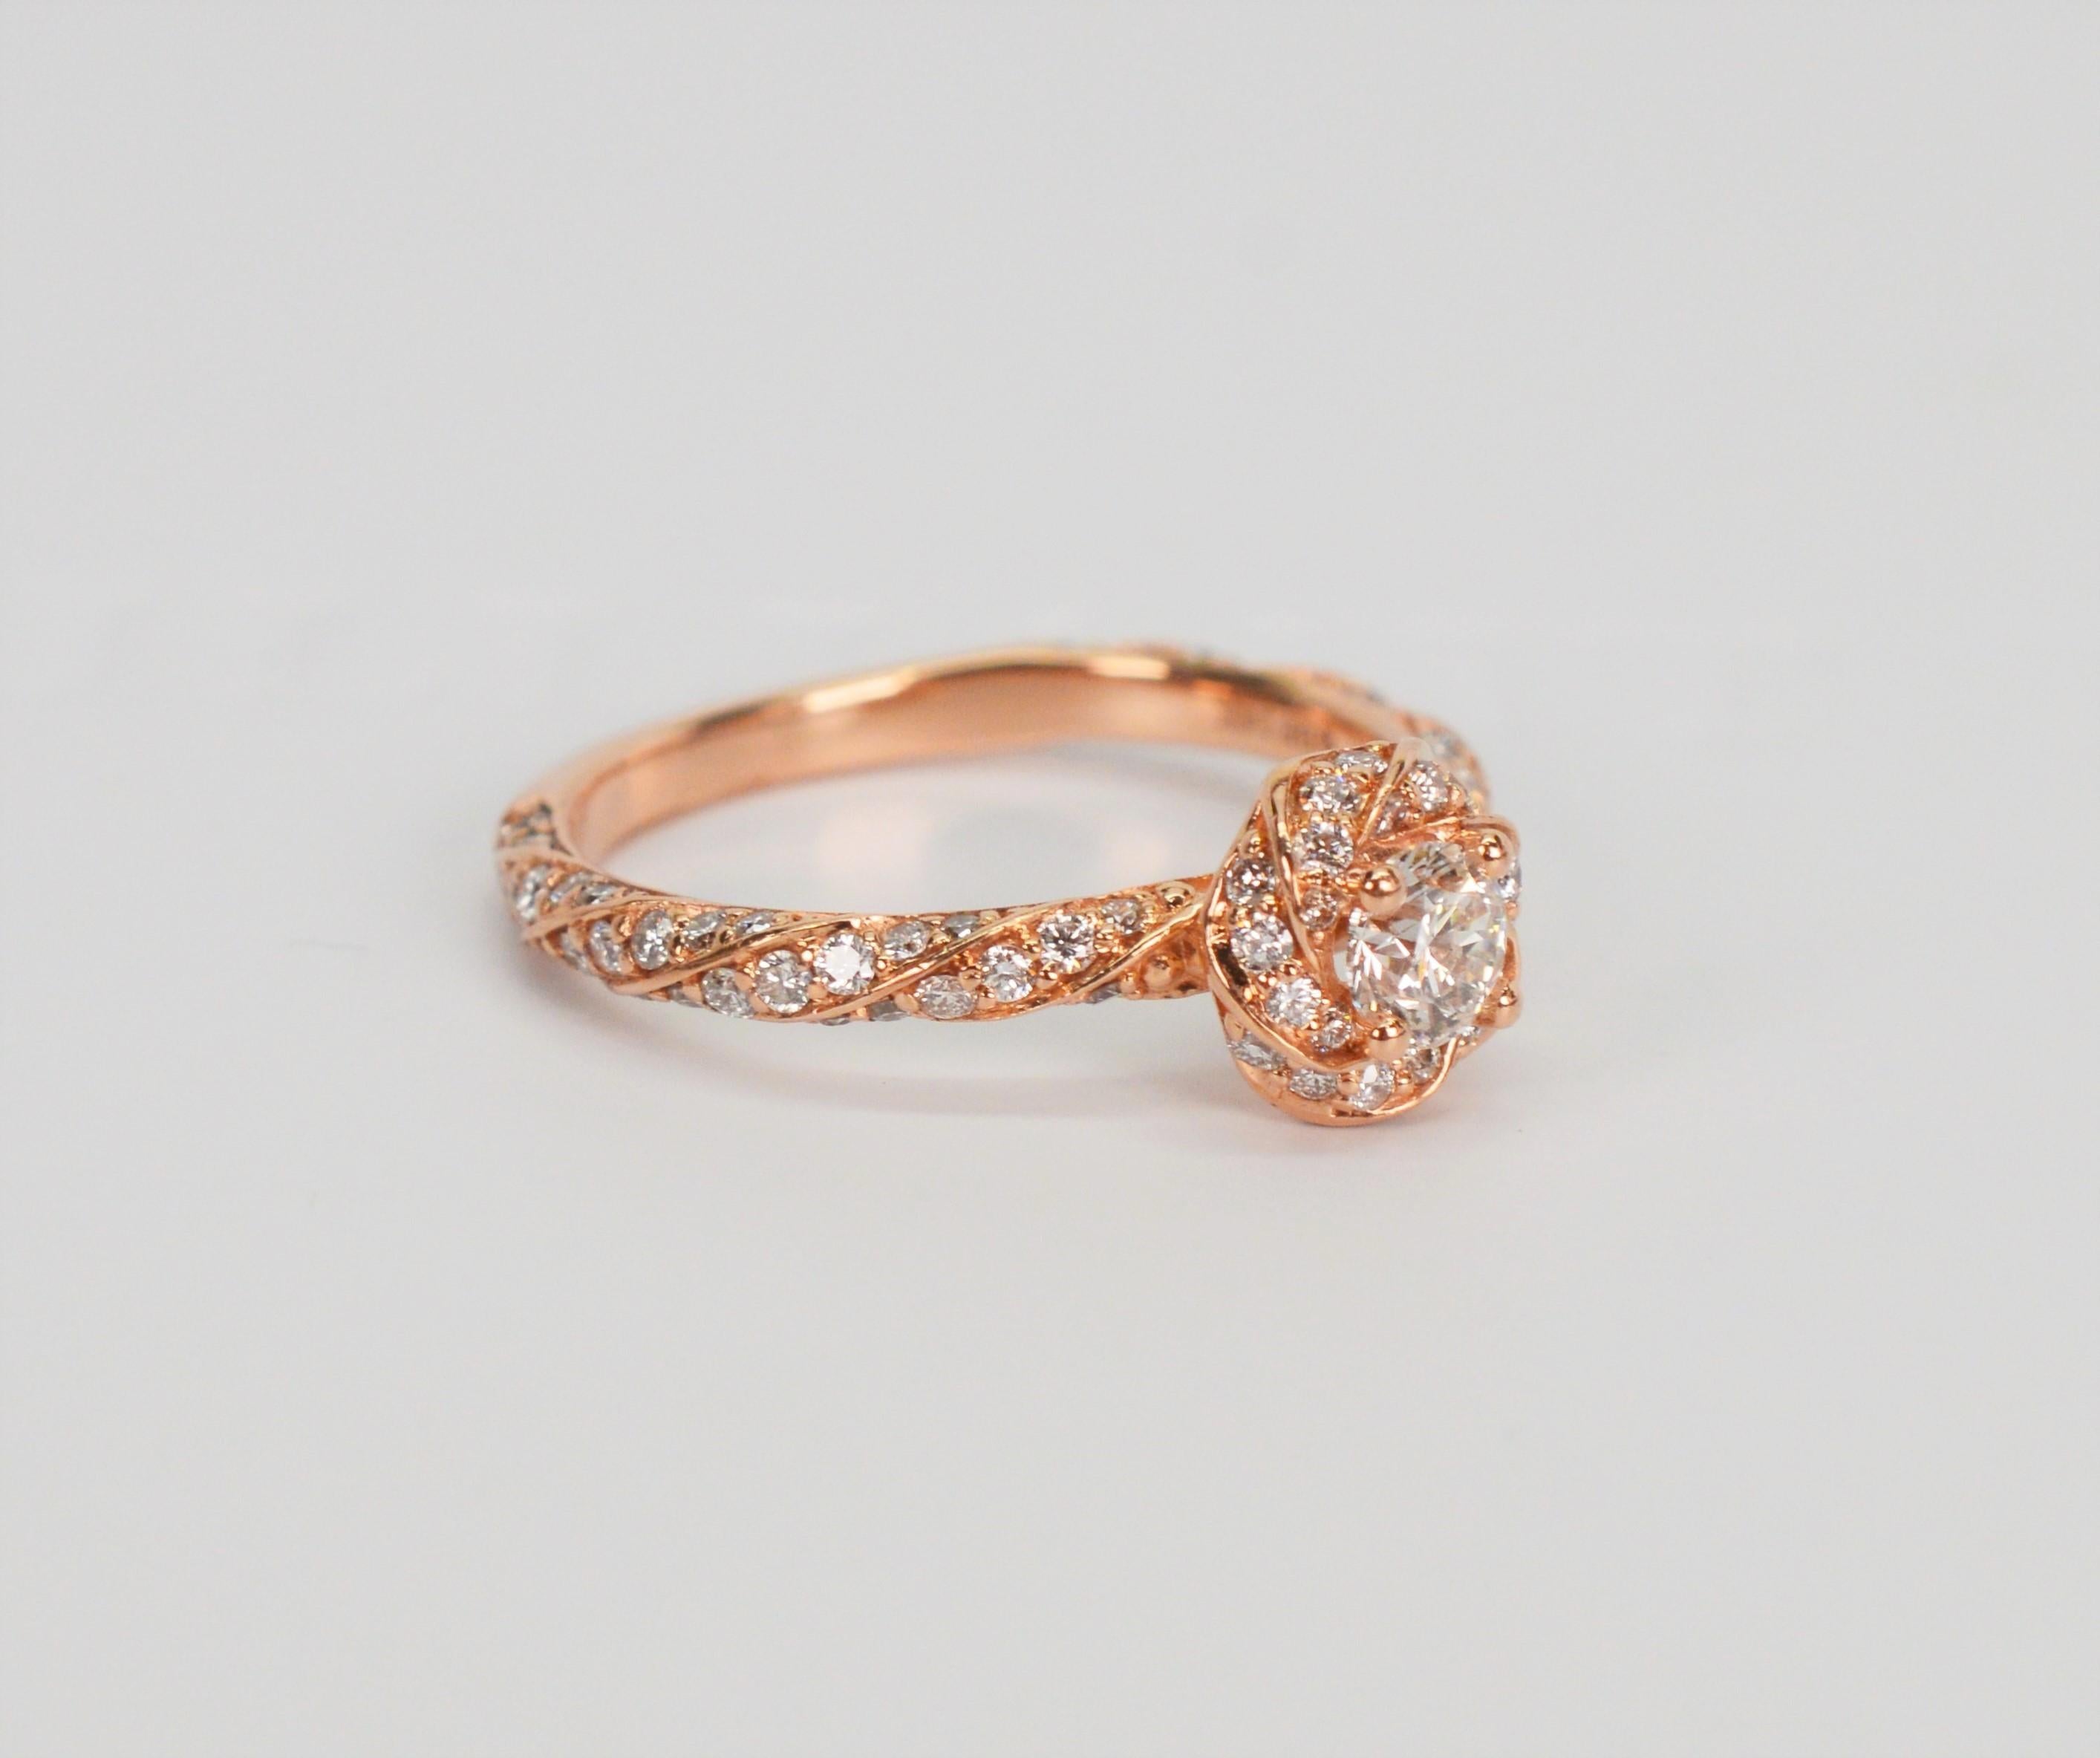 Brilliant Earth Diamond 14 Karat Rose Gold Engagement Ring w GIA Cert Box Papers For Sale 3